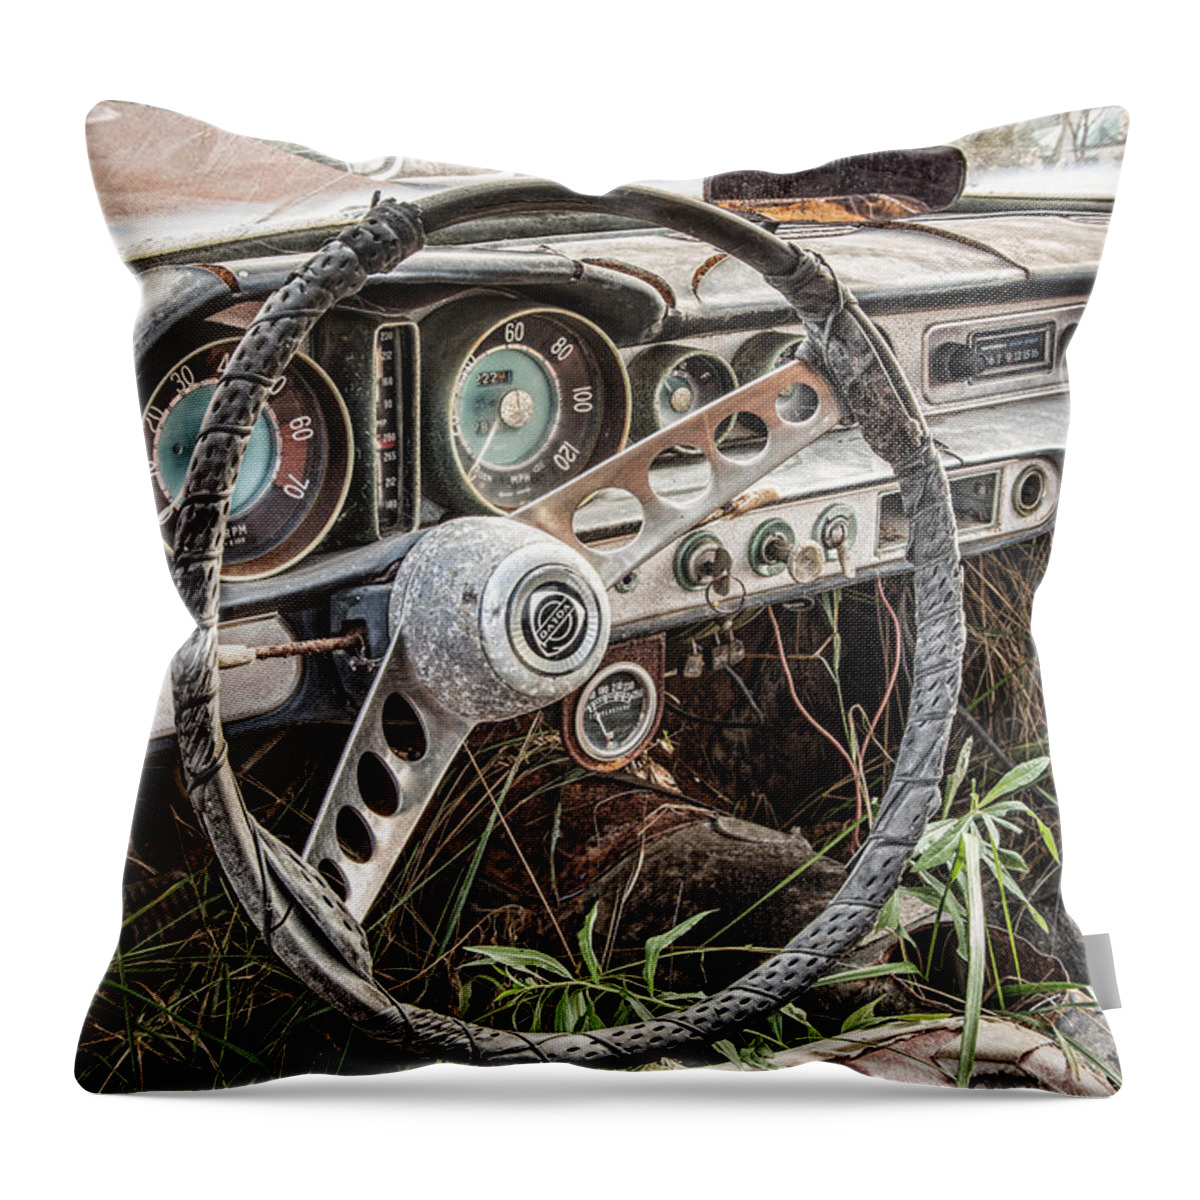 Merging With Nature Throw Pillow featuring the photograph Merging With Nature by Dale Kincaid